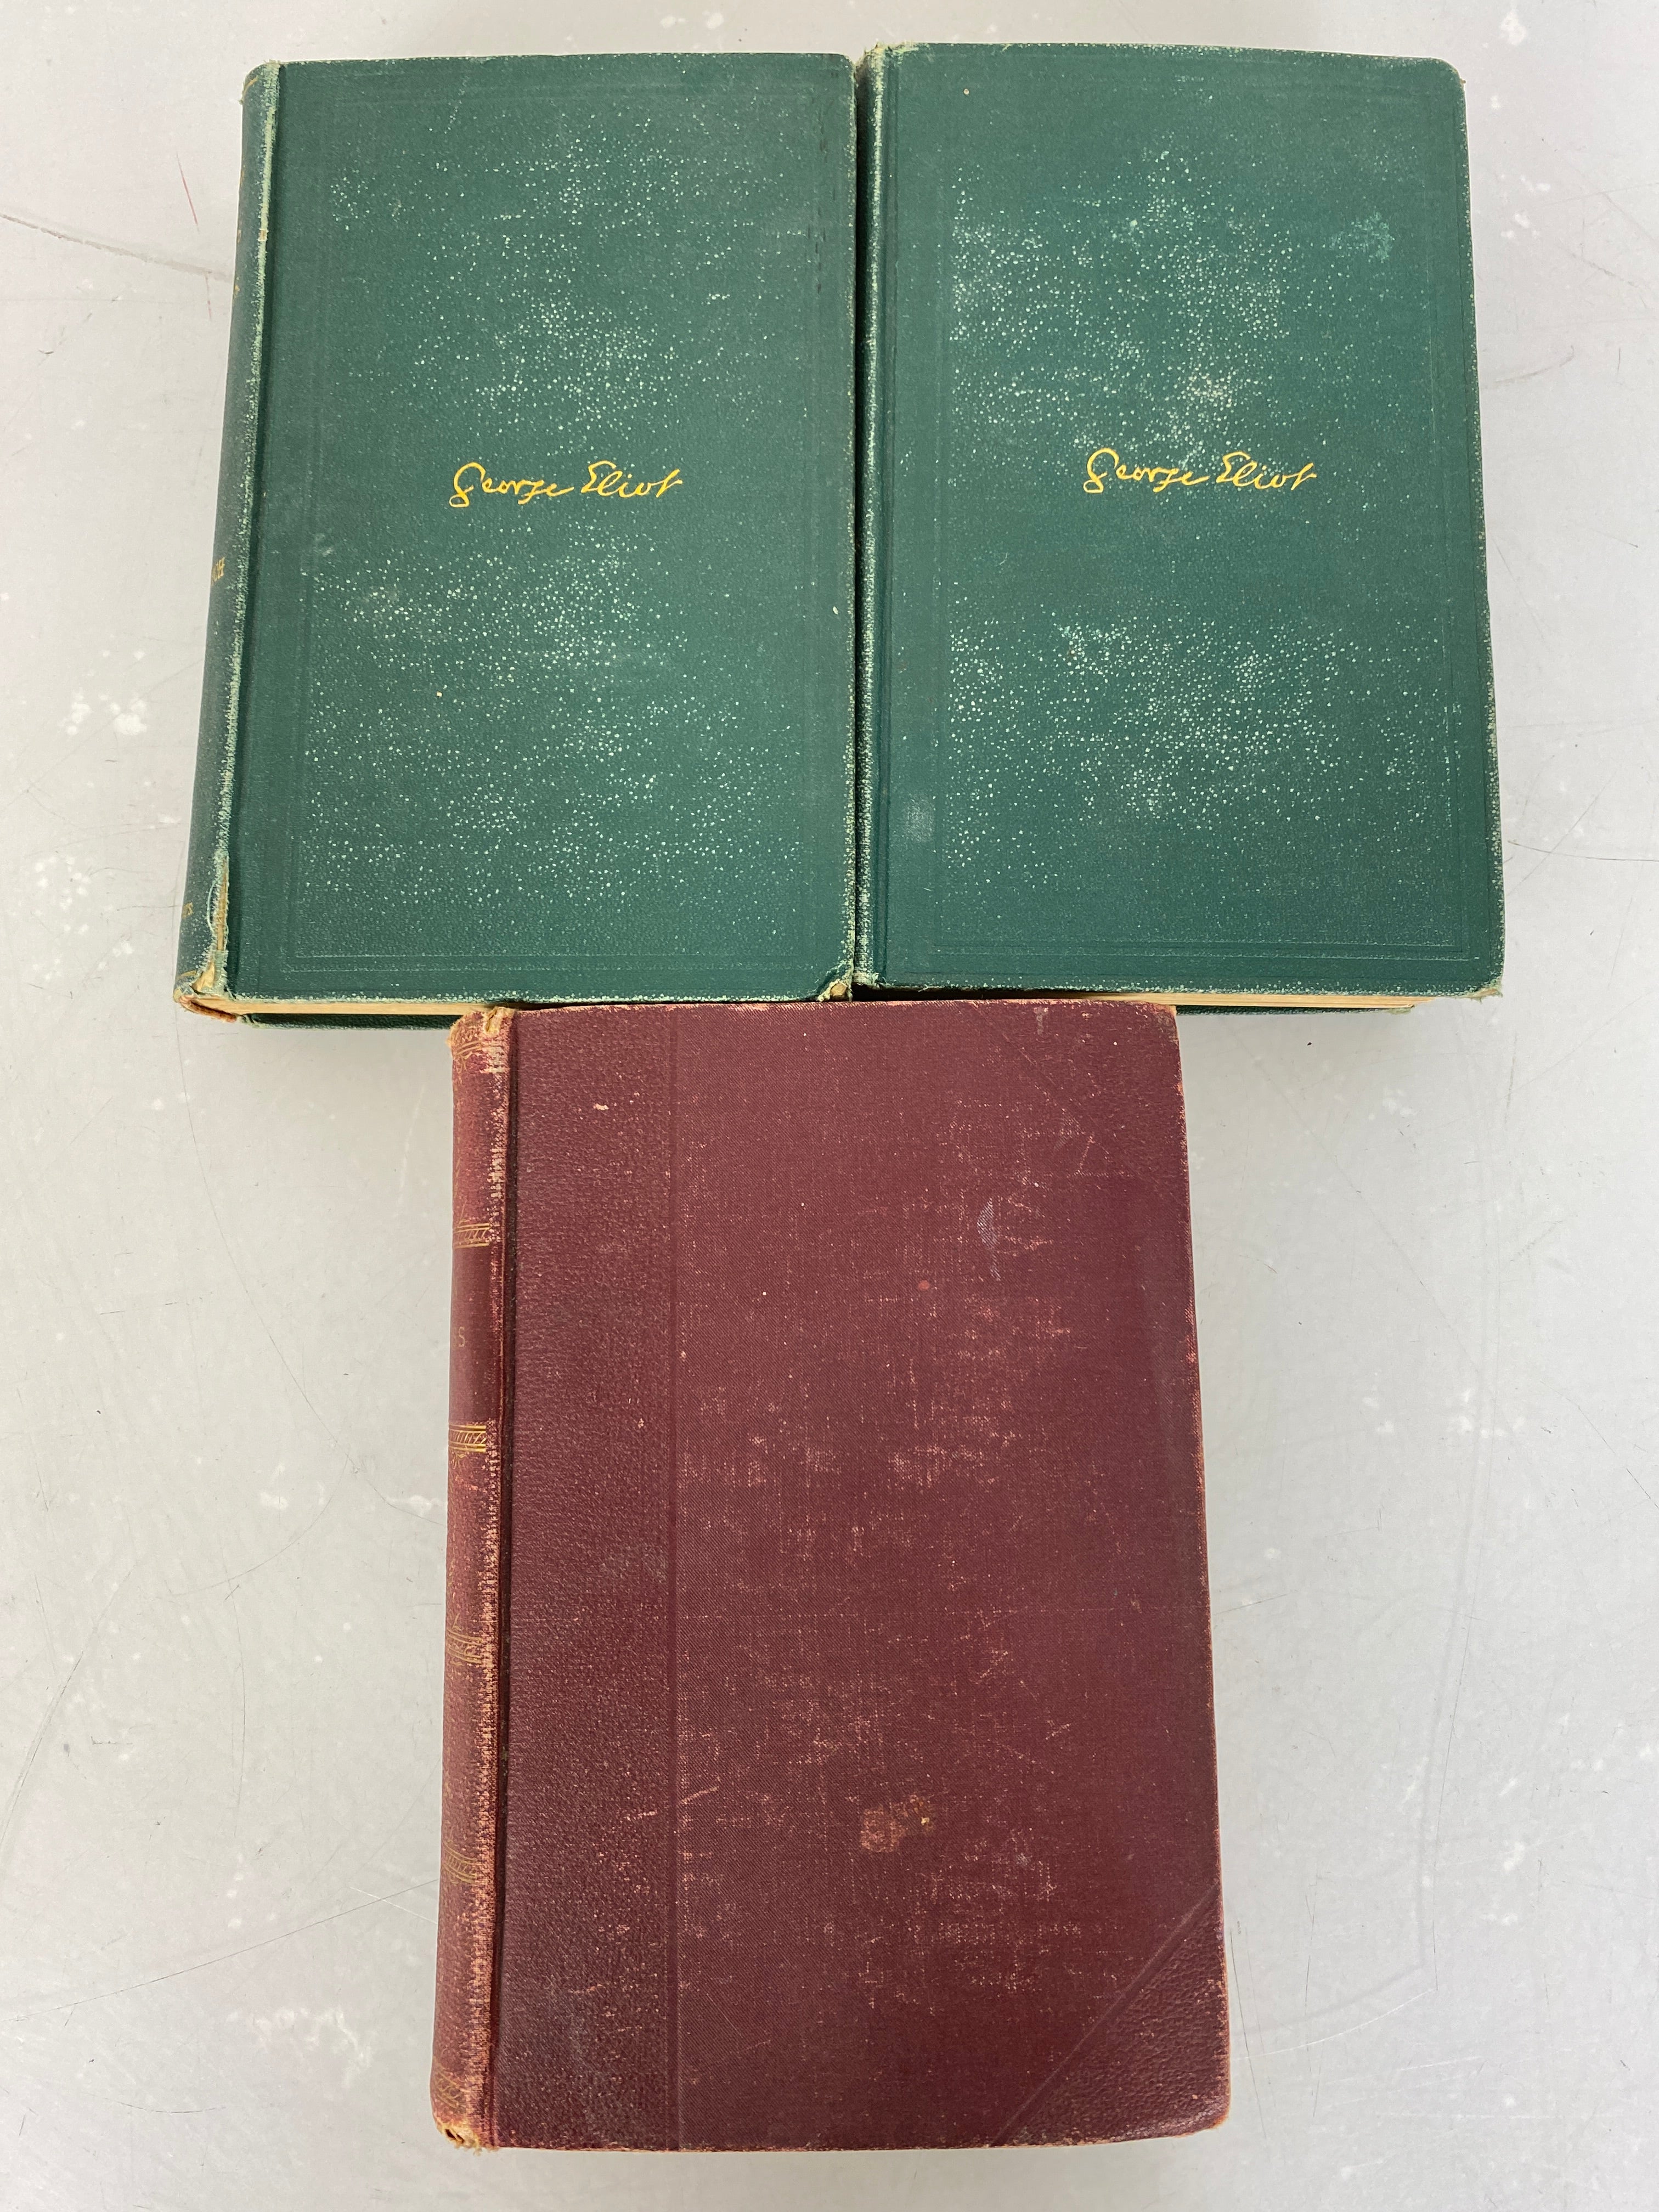 Lot of 3: Middlemarch (1873-1874) 2 Vol Set and The Mill on the Floss